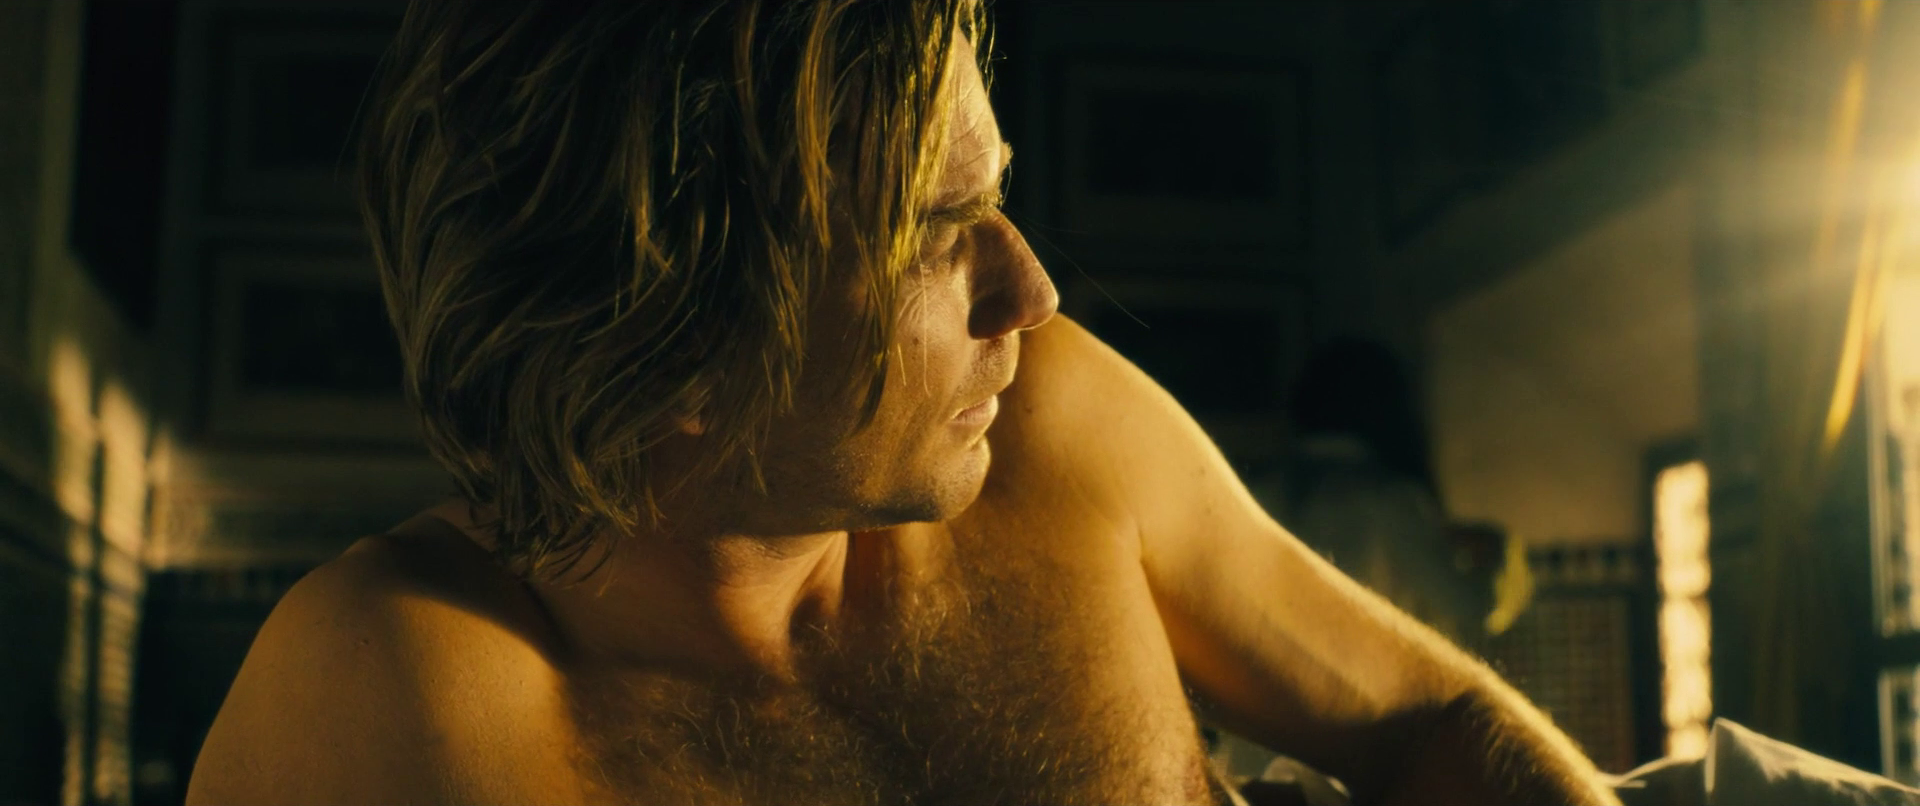 Ewan McGregor shirtless in Our Kind Of Traitor.